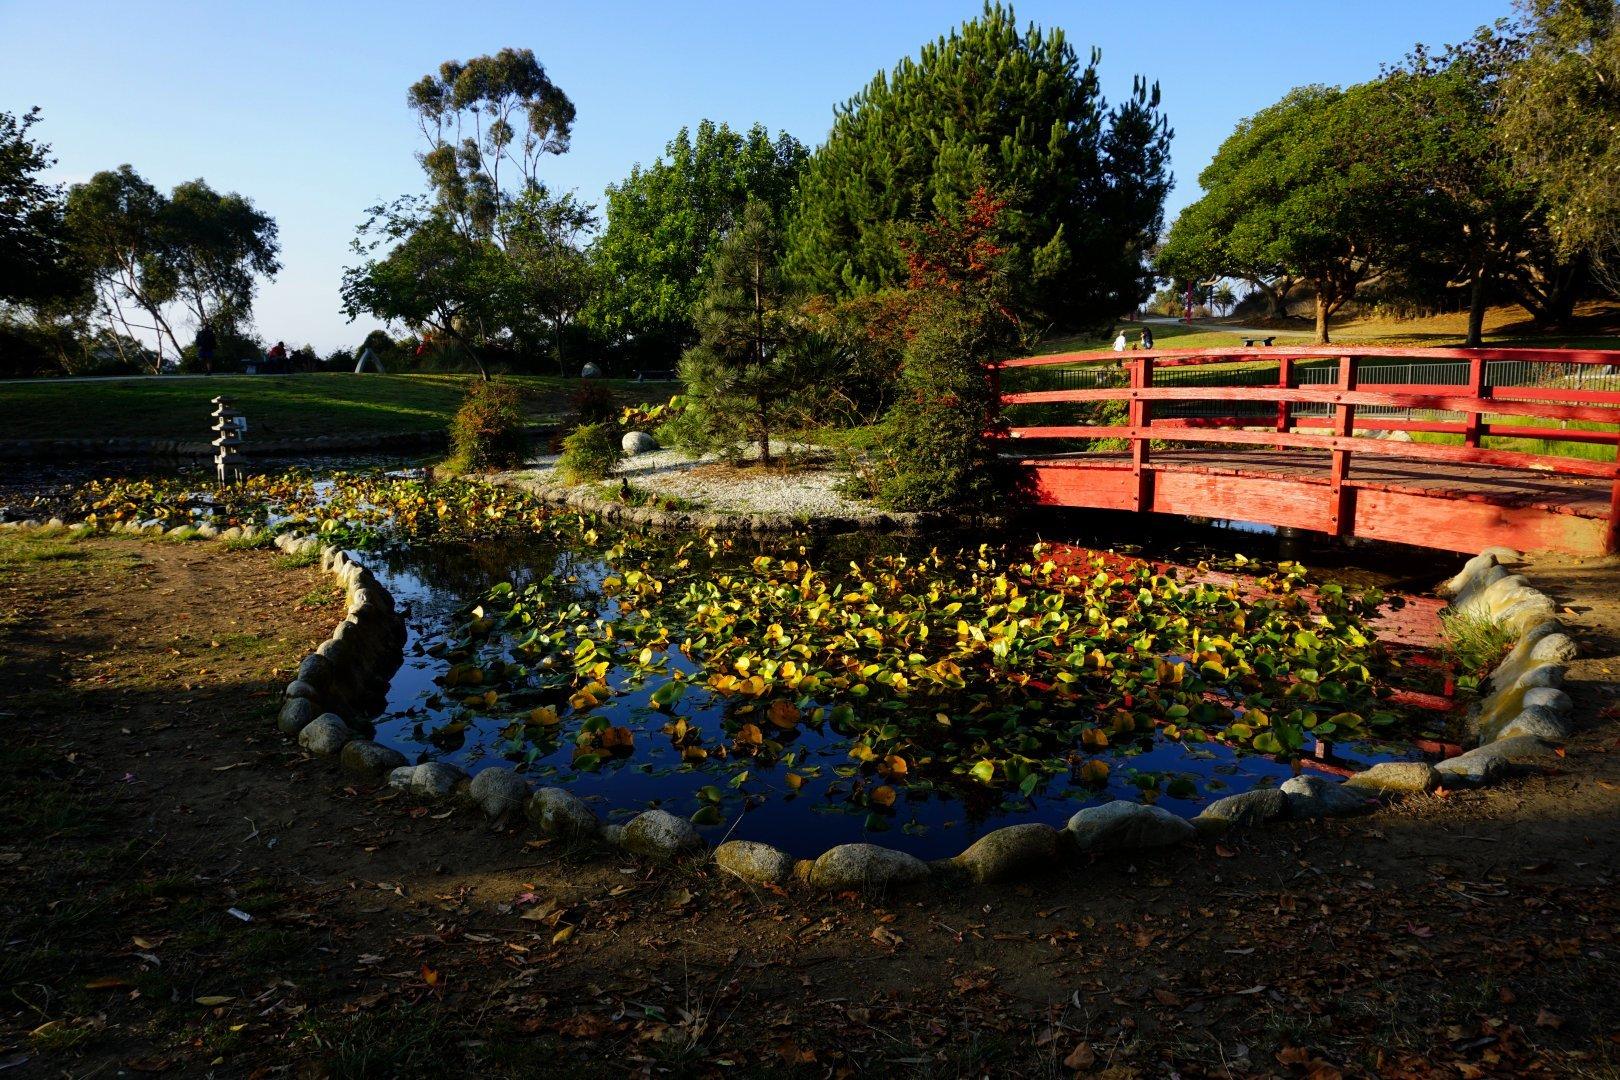 Hahn Park features picnic areas, camping areas, playgrounds, a semi-wild area with hiking trails, and a Japanese-themed #garden with koi #pond and bridges.